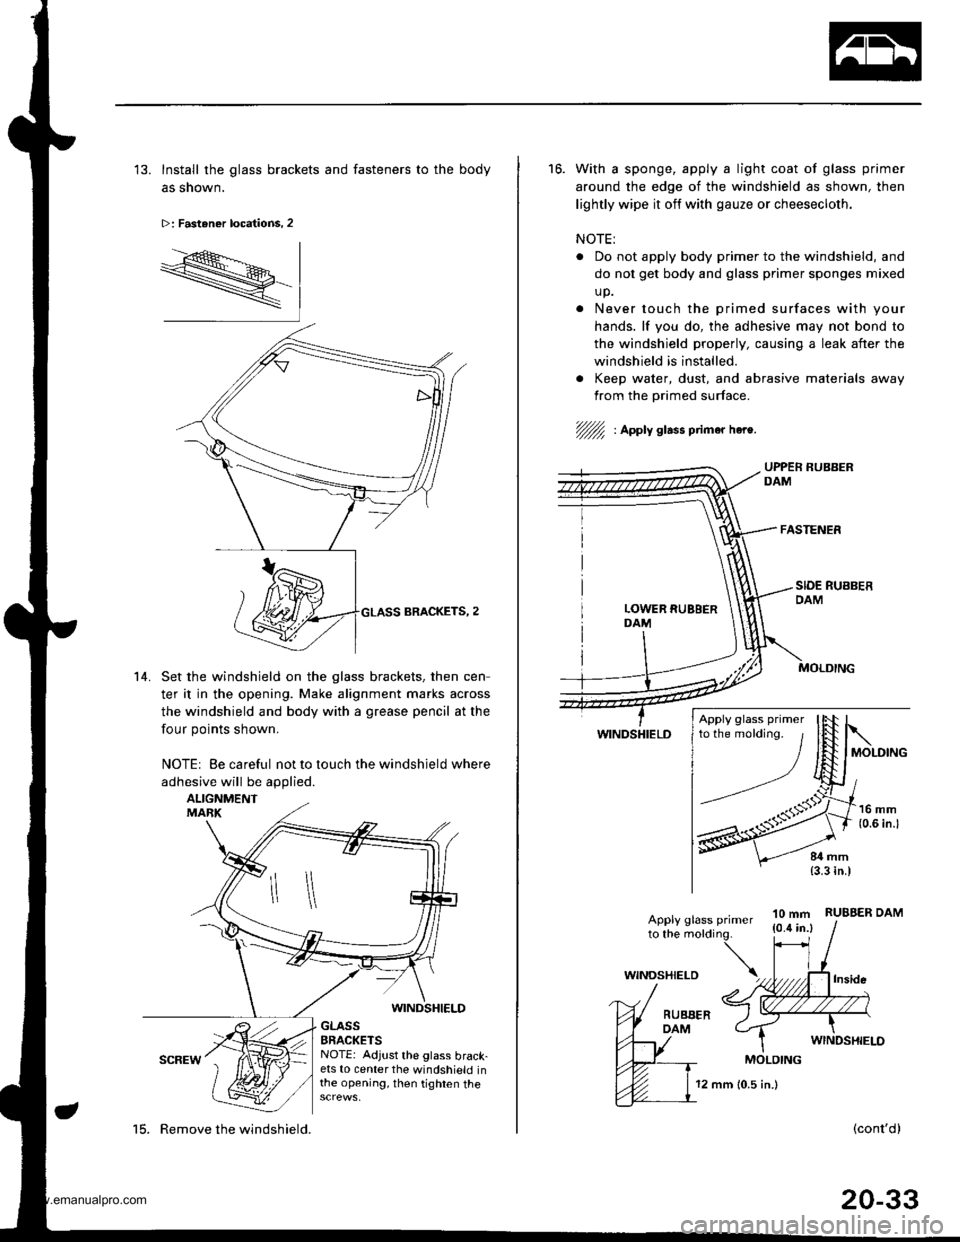 HONDA CR-V 1999 RD1-RD3 / 1.G Workshop Manual 
13. Install the glass brackets and fasteners to the body
as shown.
>: Fastener locations, 2
R-
14. Set the windshield on the glass brackets. then cen
ter it in the opening. Make alignment marks acro